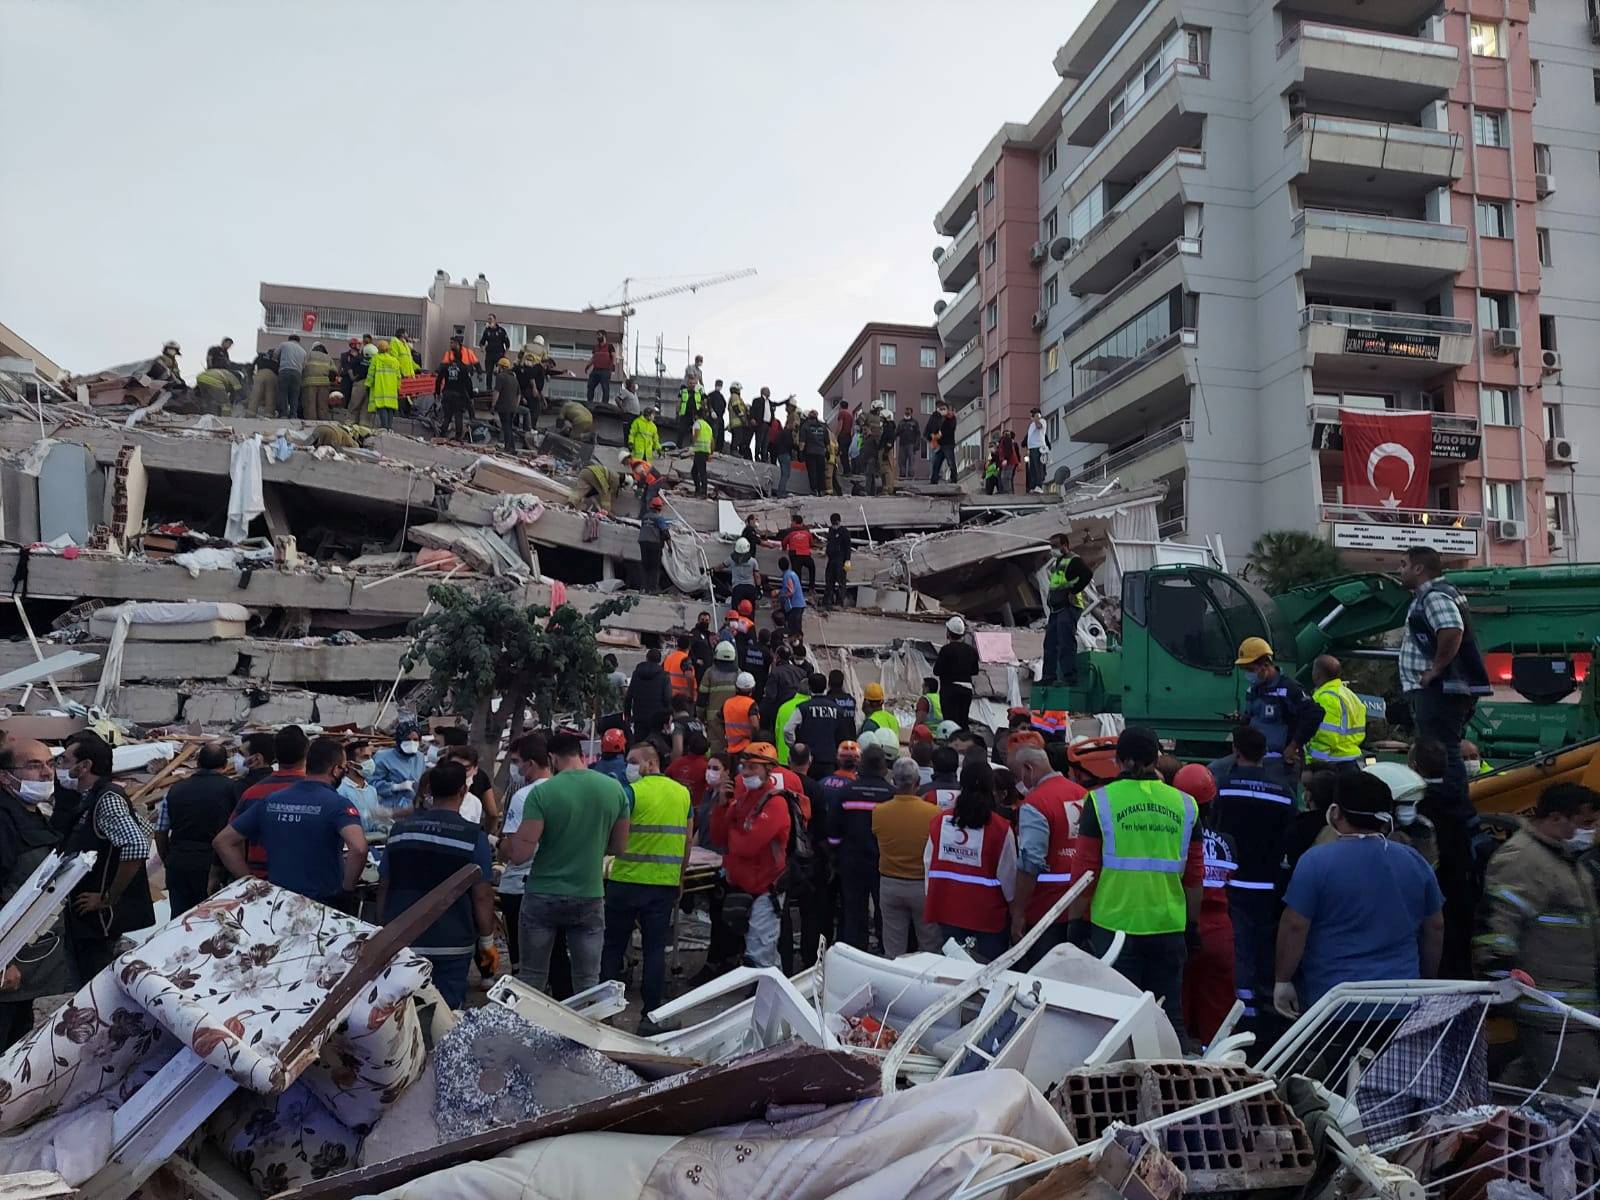 People search for survivors at a collapsed building after a strong earthquake struck the Aegean Sea where some buildings collapsed in the coastal province of Izmir